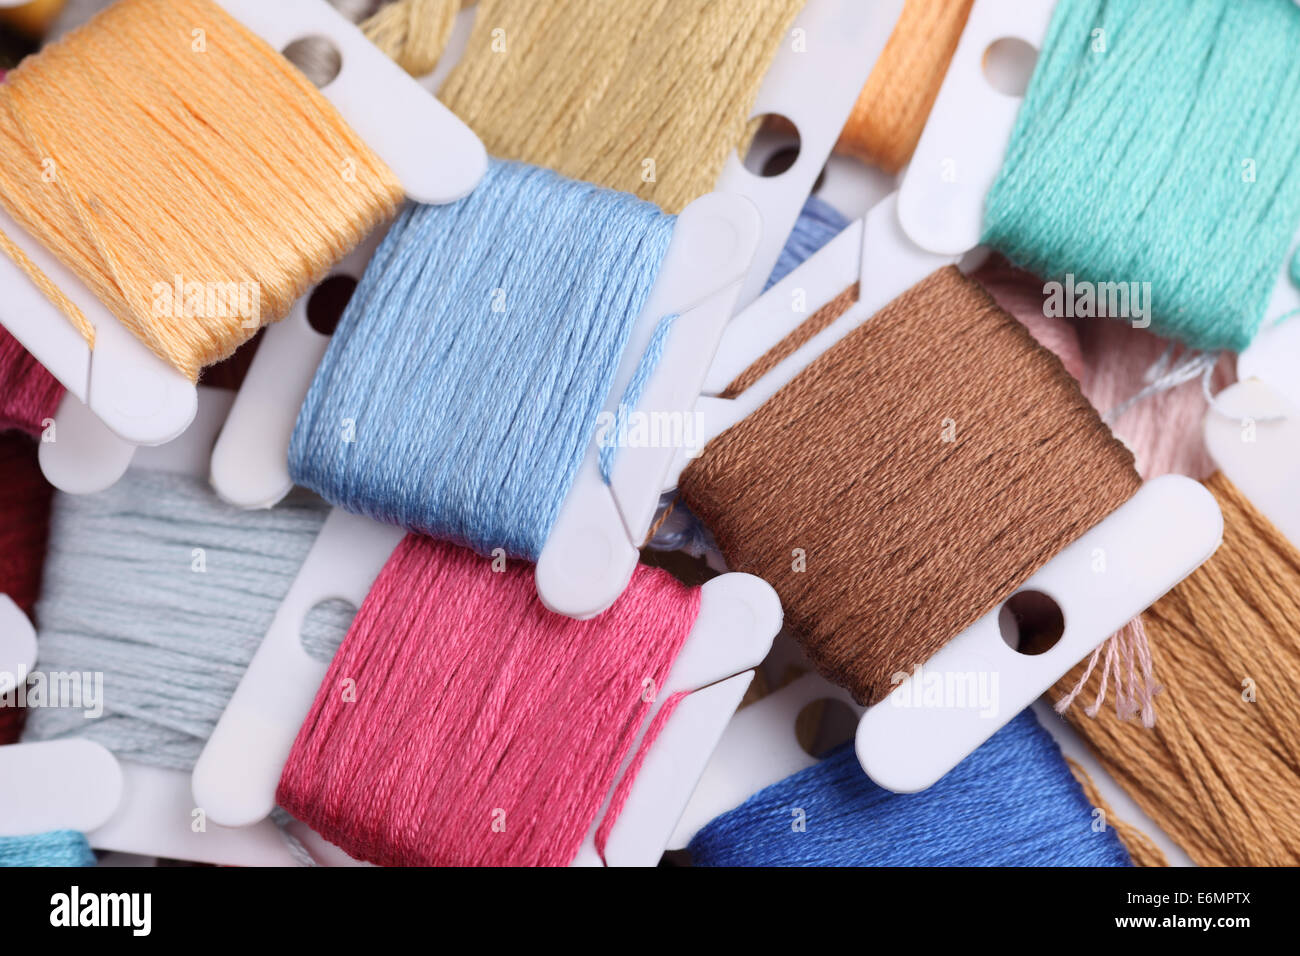 pile-of-embroidery-thread-cards-stock-photo-alamy